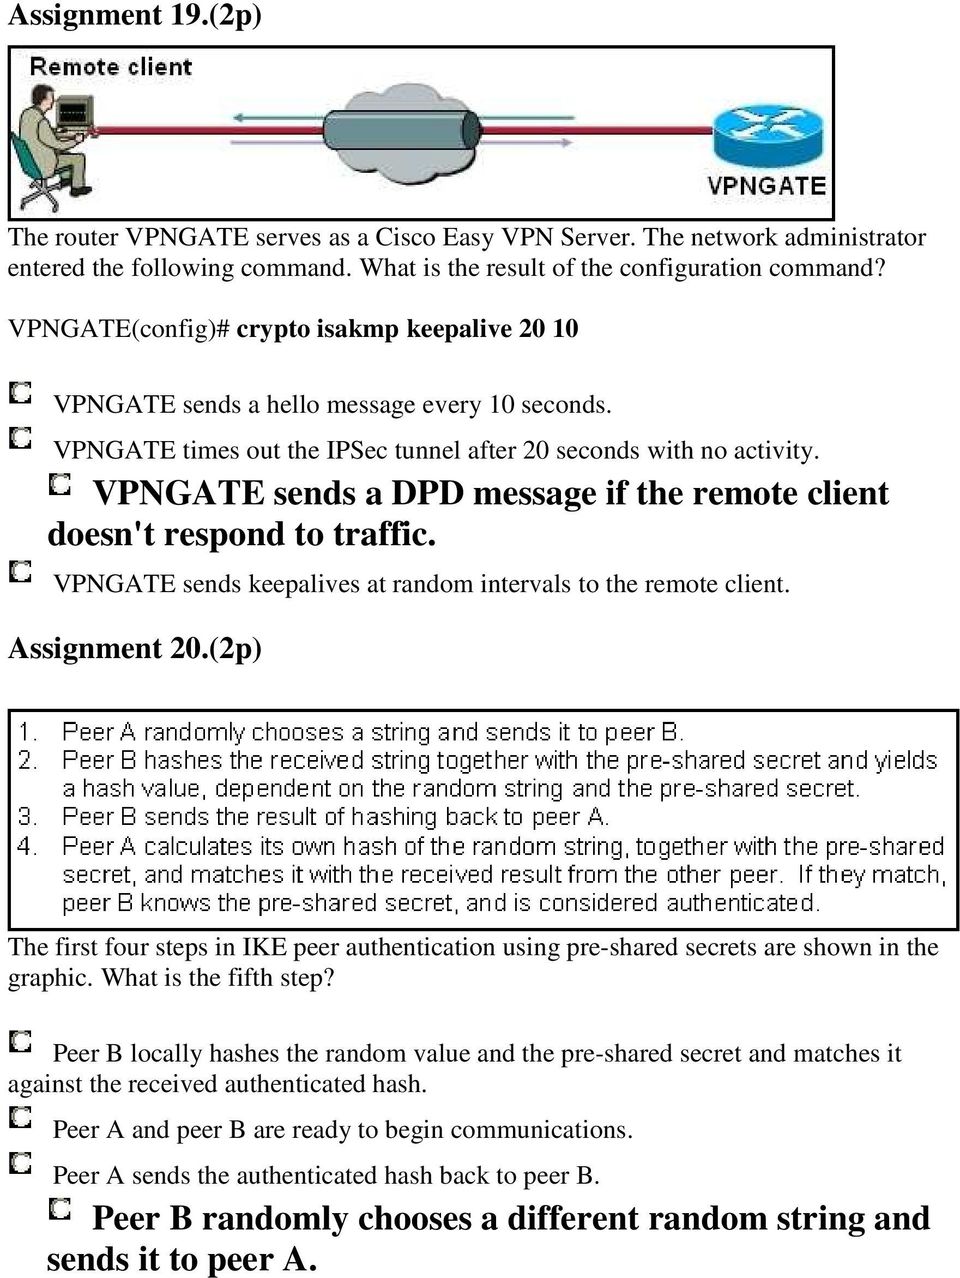 VPNGATE sends a DPD message if the remote client doesn't respond to traffic. VPNGATE sends keepalives at random intervals to the remote client. Assignment 20.